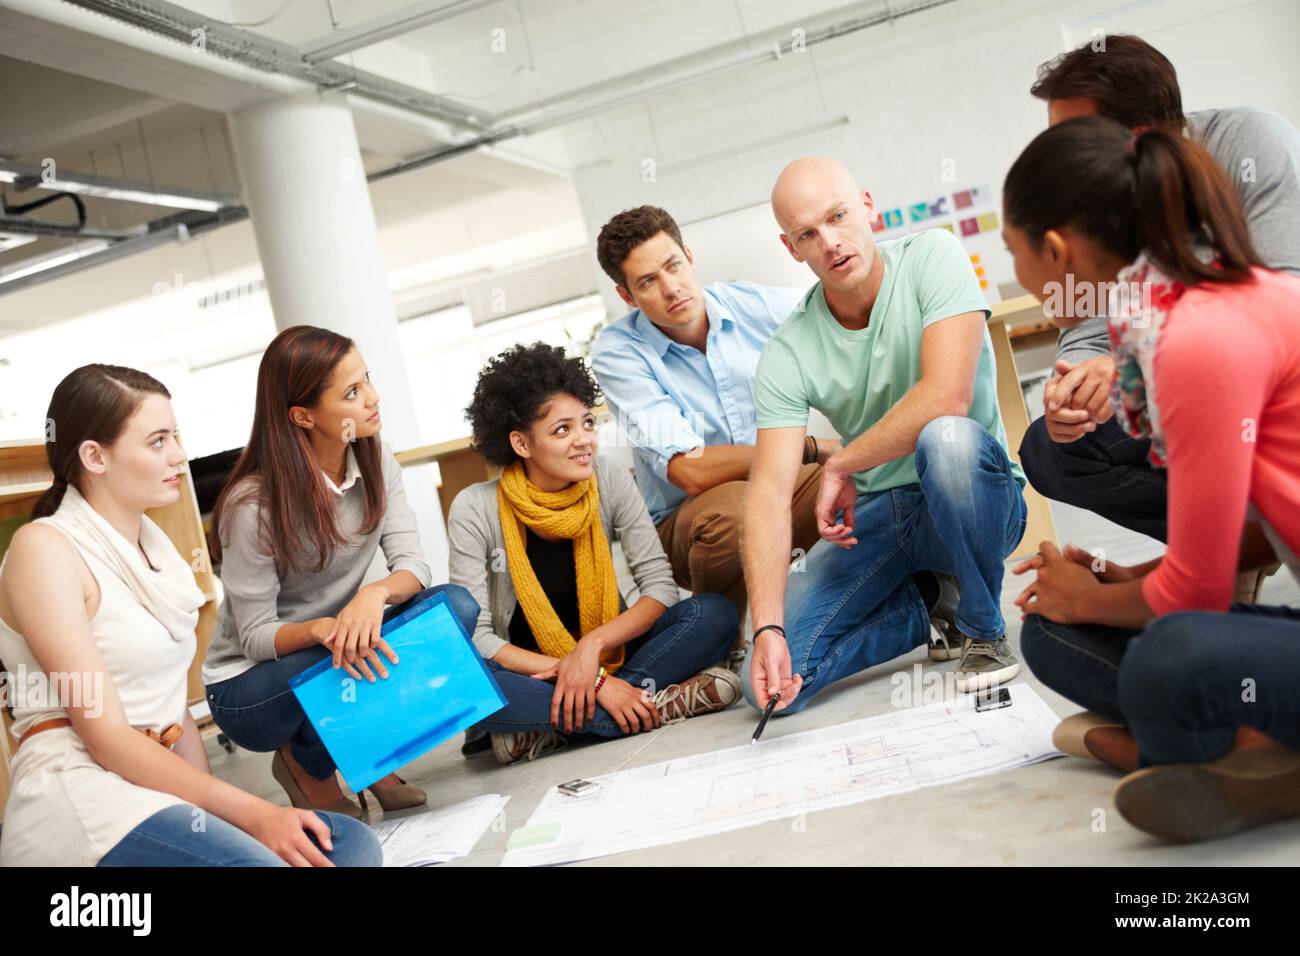 Dynamic designers. A group of multi-ethnic creatives huddled together and listening to the presentation of a plan. Stock Photo